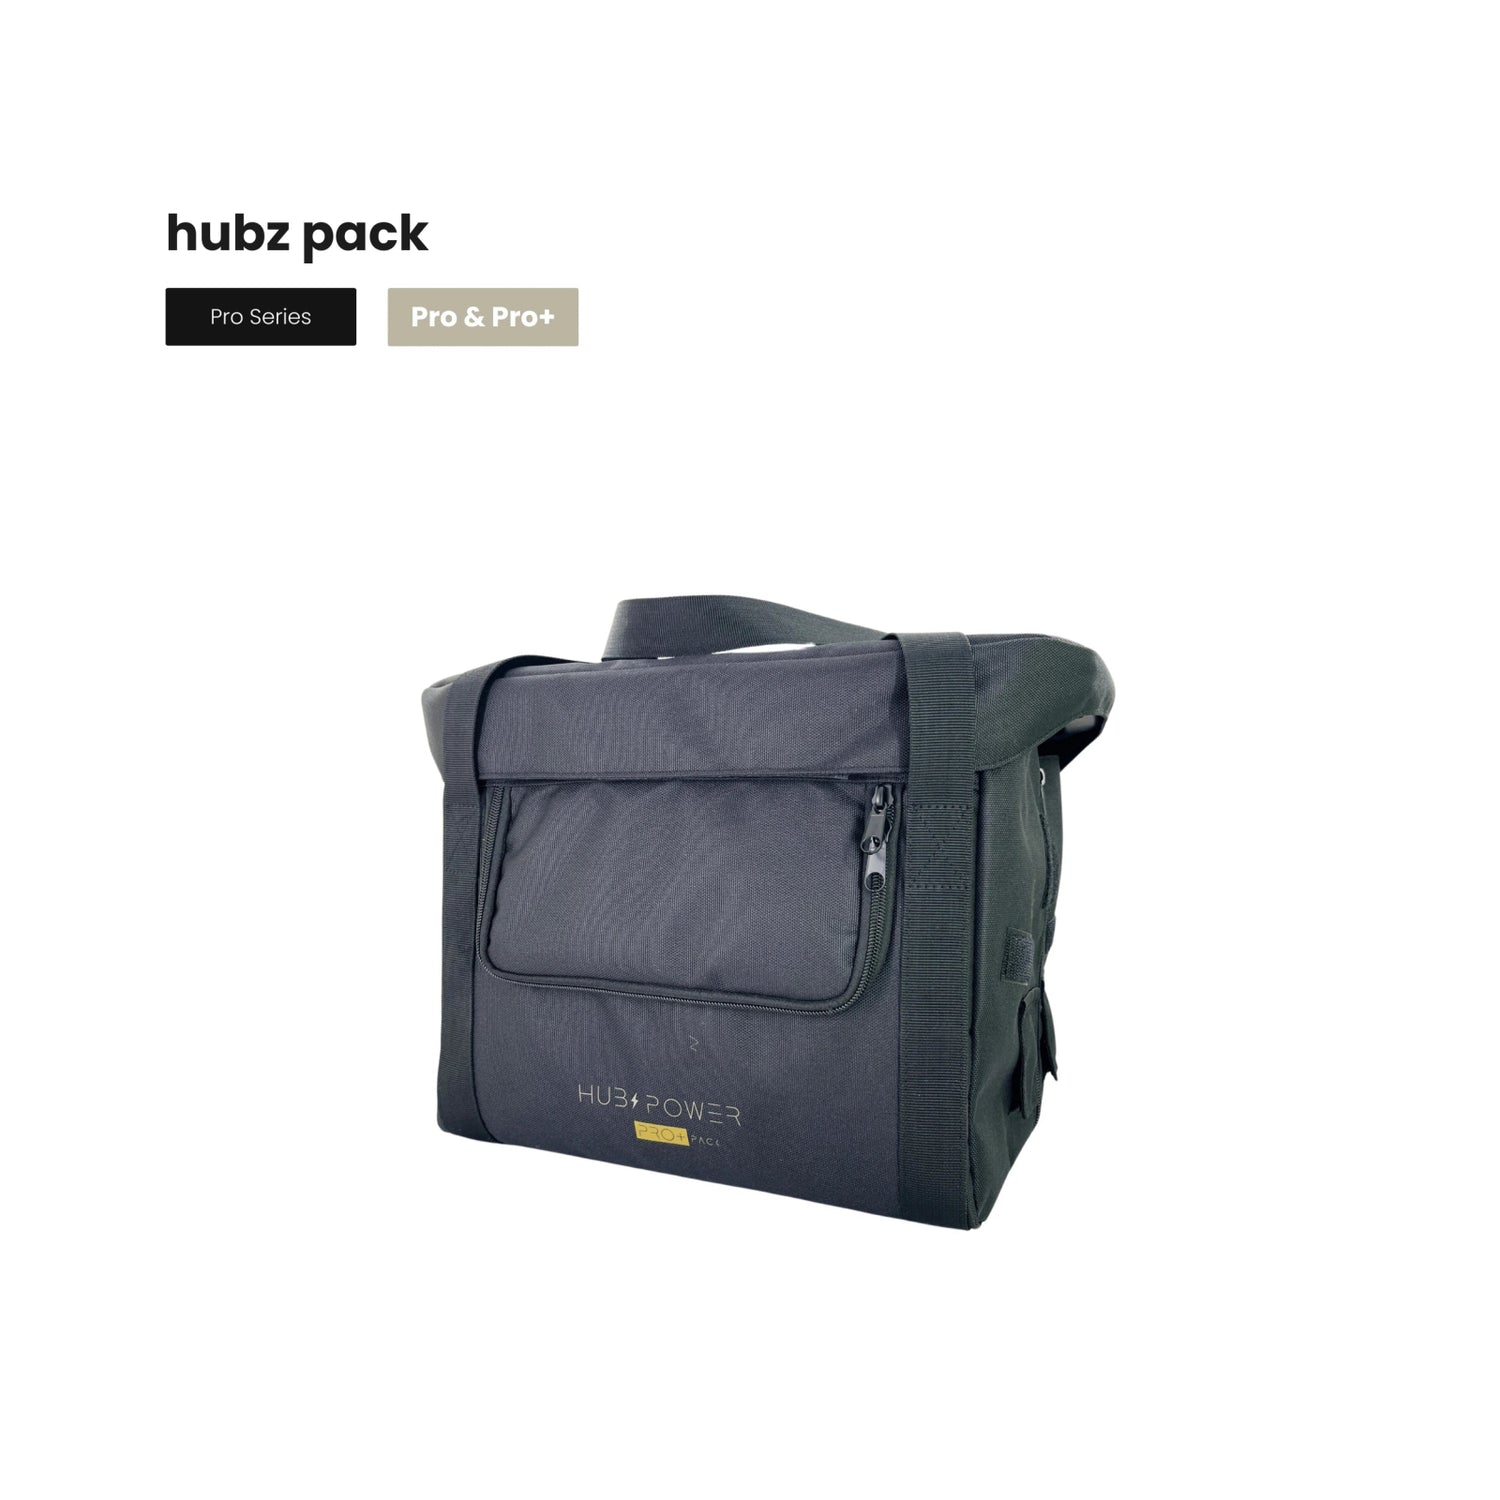 hubz pro bag for Portable Power Stations, Portable Solar Panels &amp; Home Power Stations for eco-friendly power on-demand.